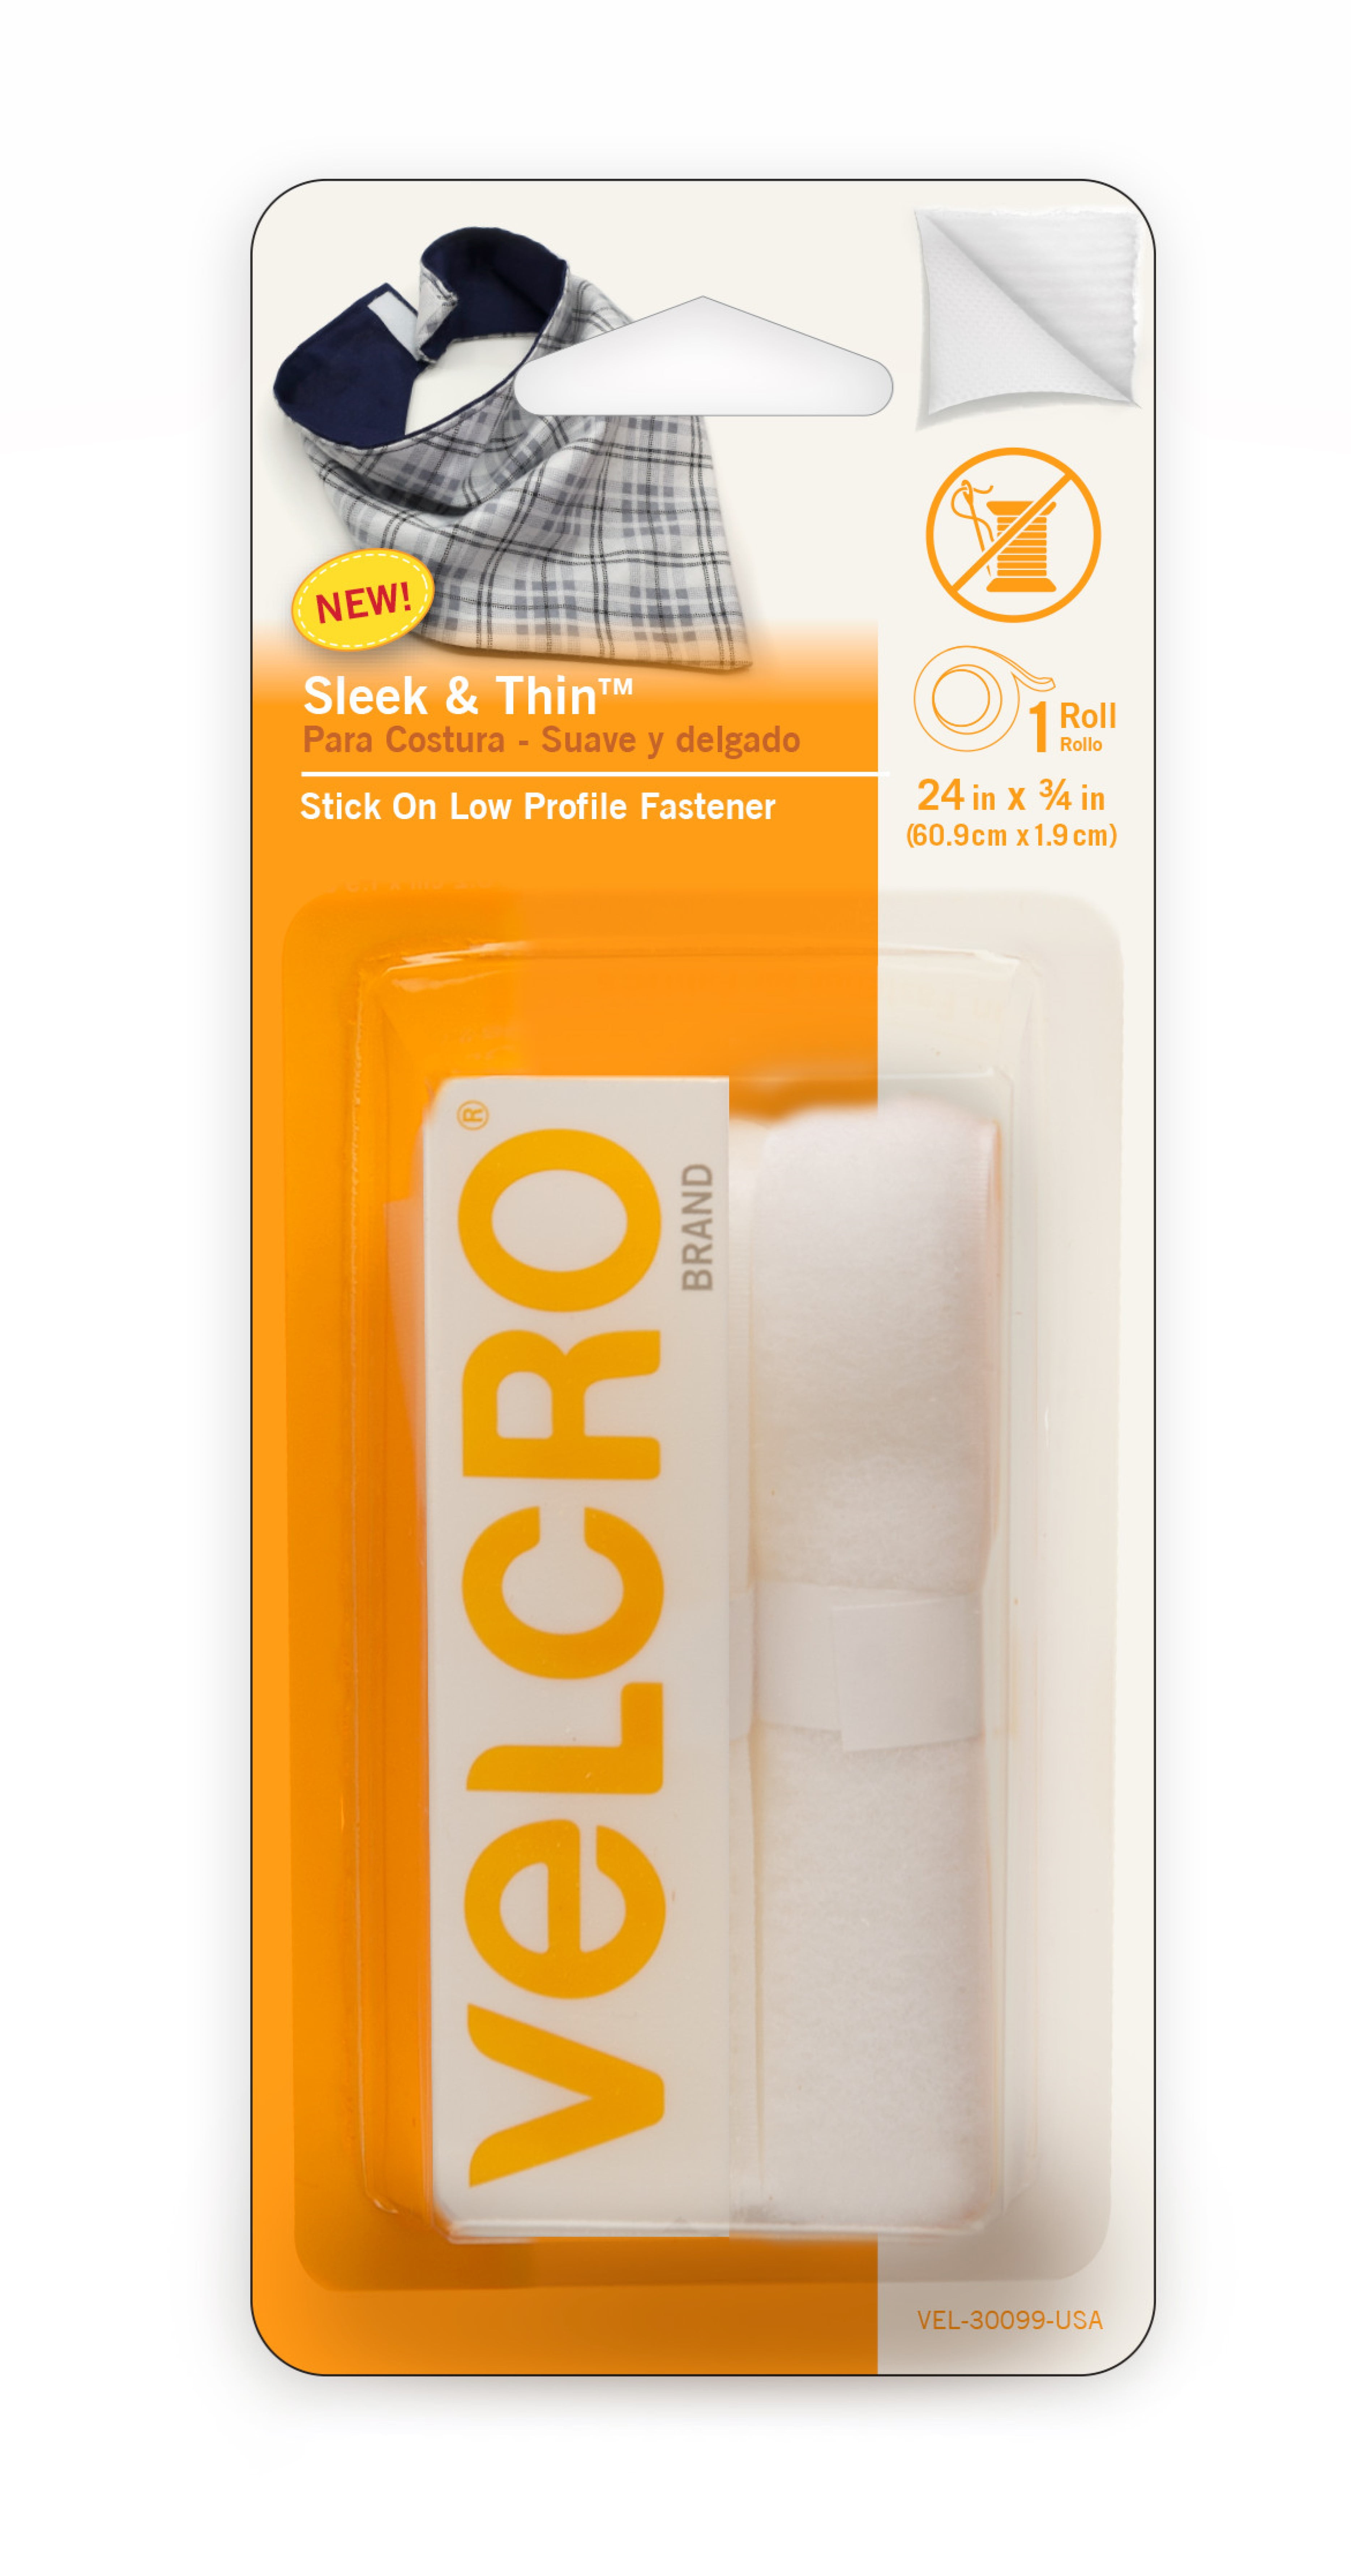 VELCRO Brand Sleek and Thin Stick on Tape for Fabrics 24in x 3/4in White  Adhesive Back No Sewing